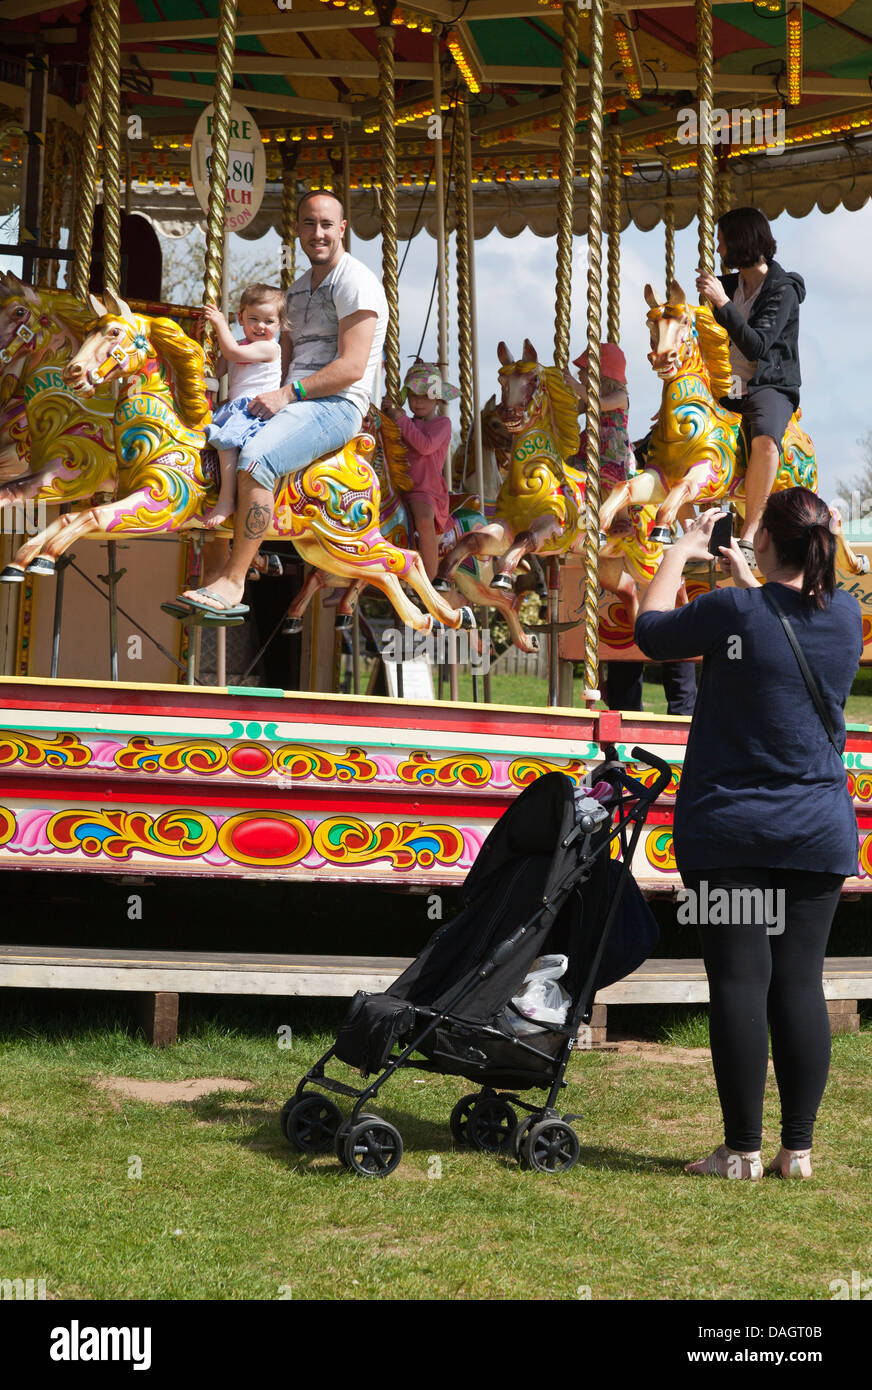 Snapping the family at a merry-go-round in Millets Farm, Oxford Stock Photo